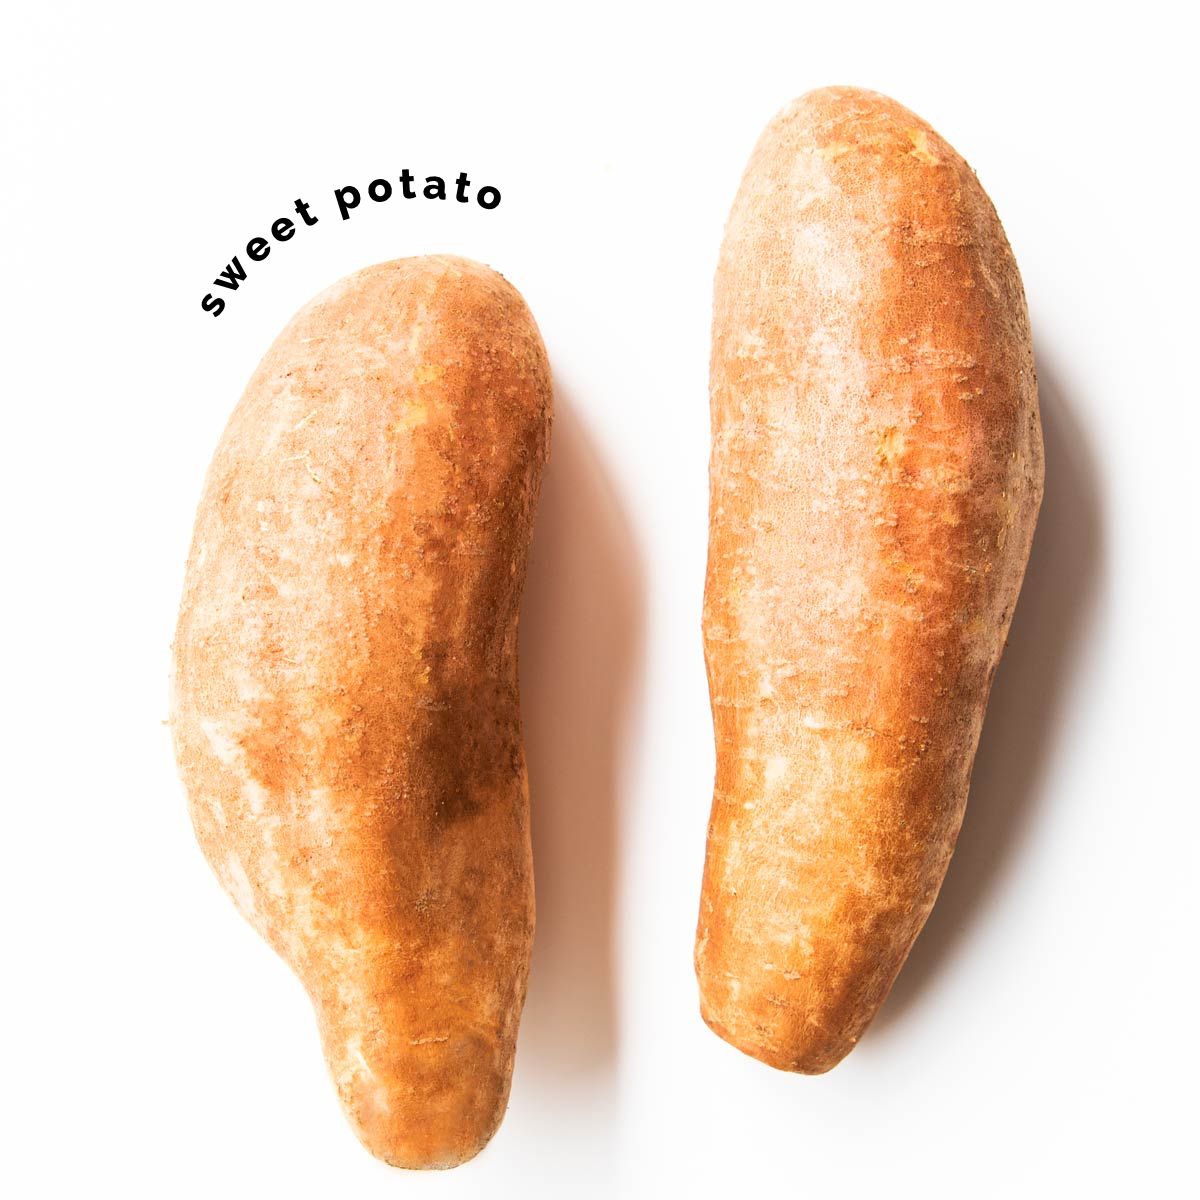 Two Sweet Potatoes on White Background.